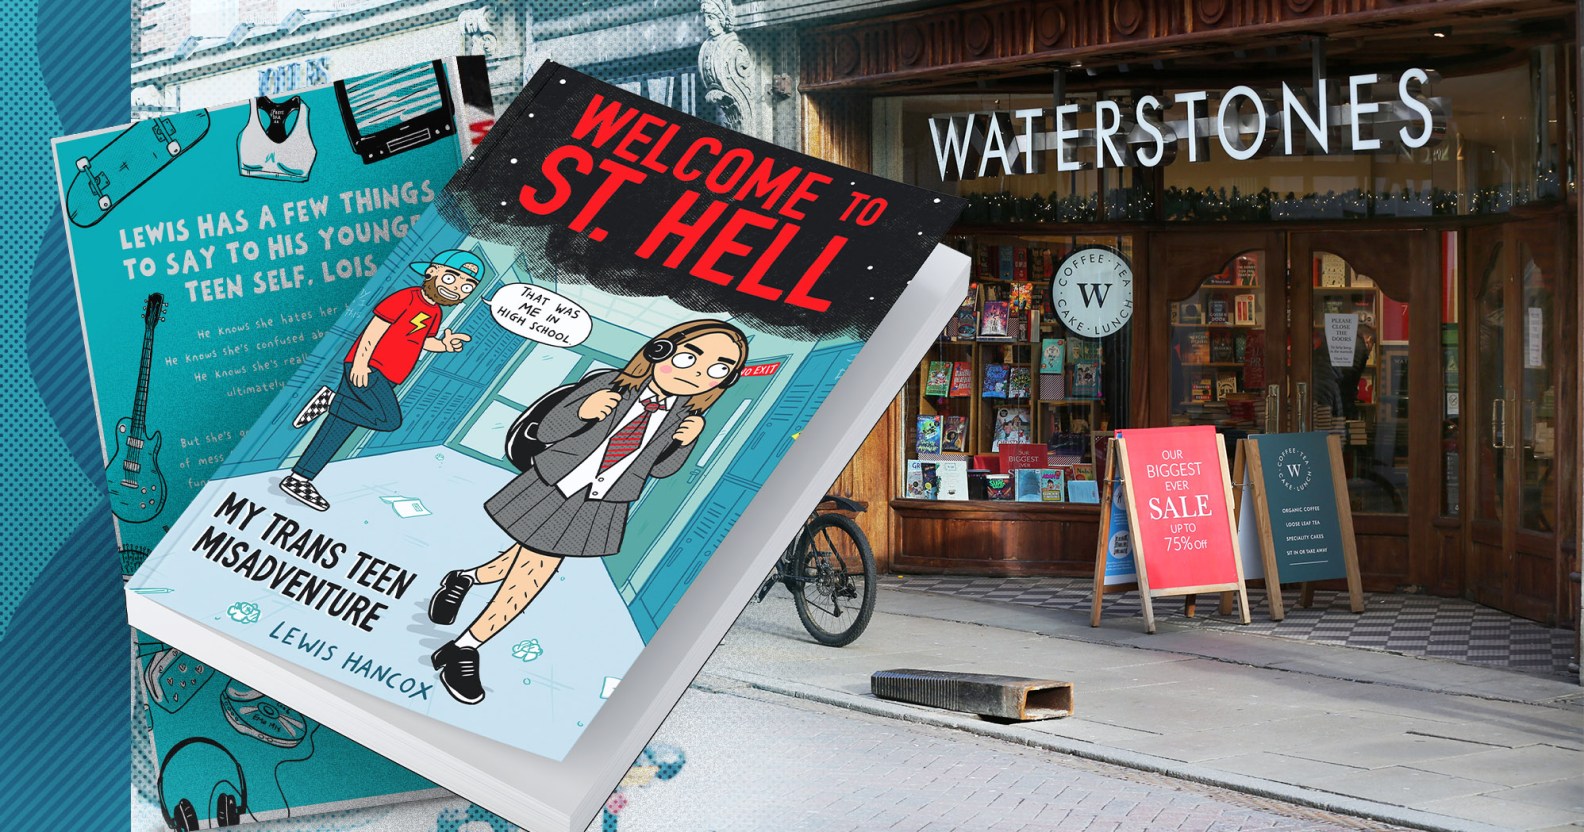 Waterstones bookshop and Welcome to St Hell: My trans teen misadventure